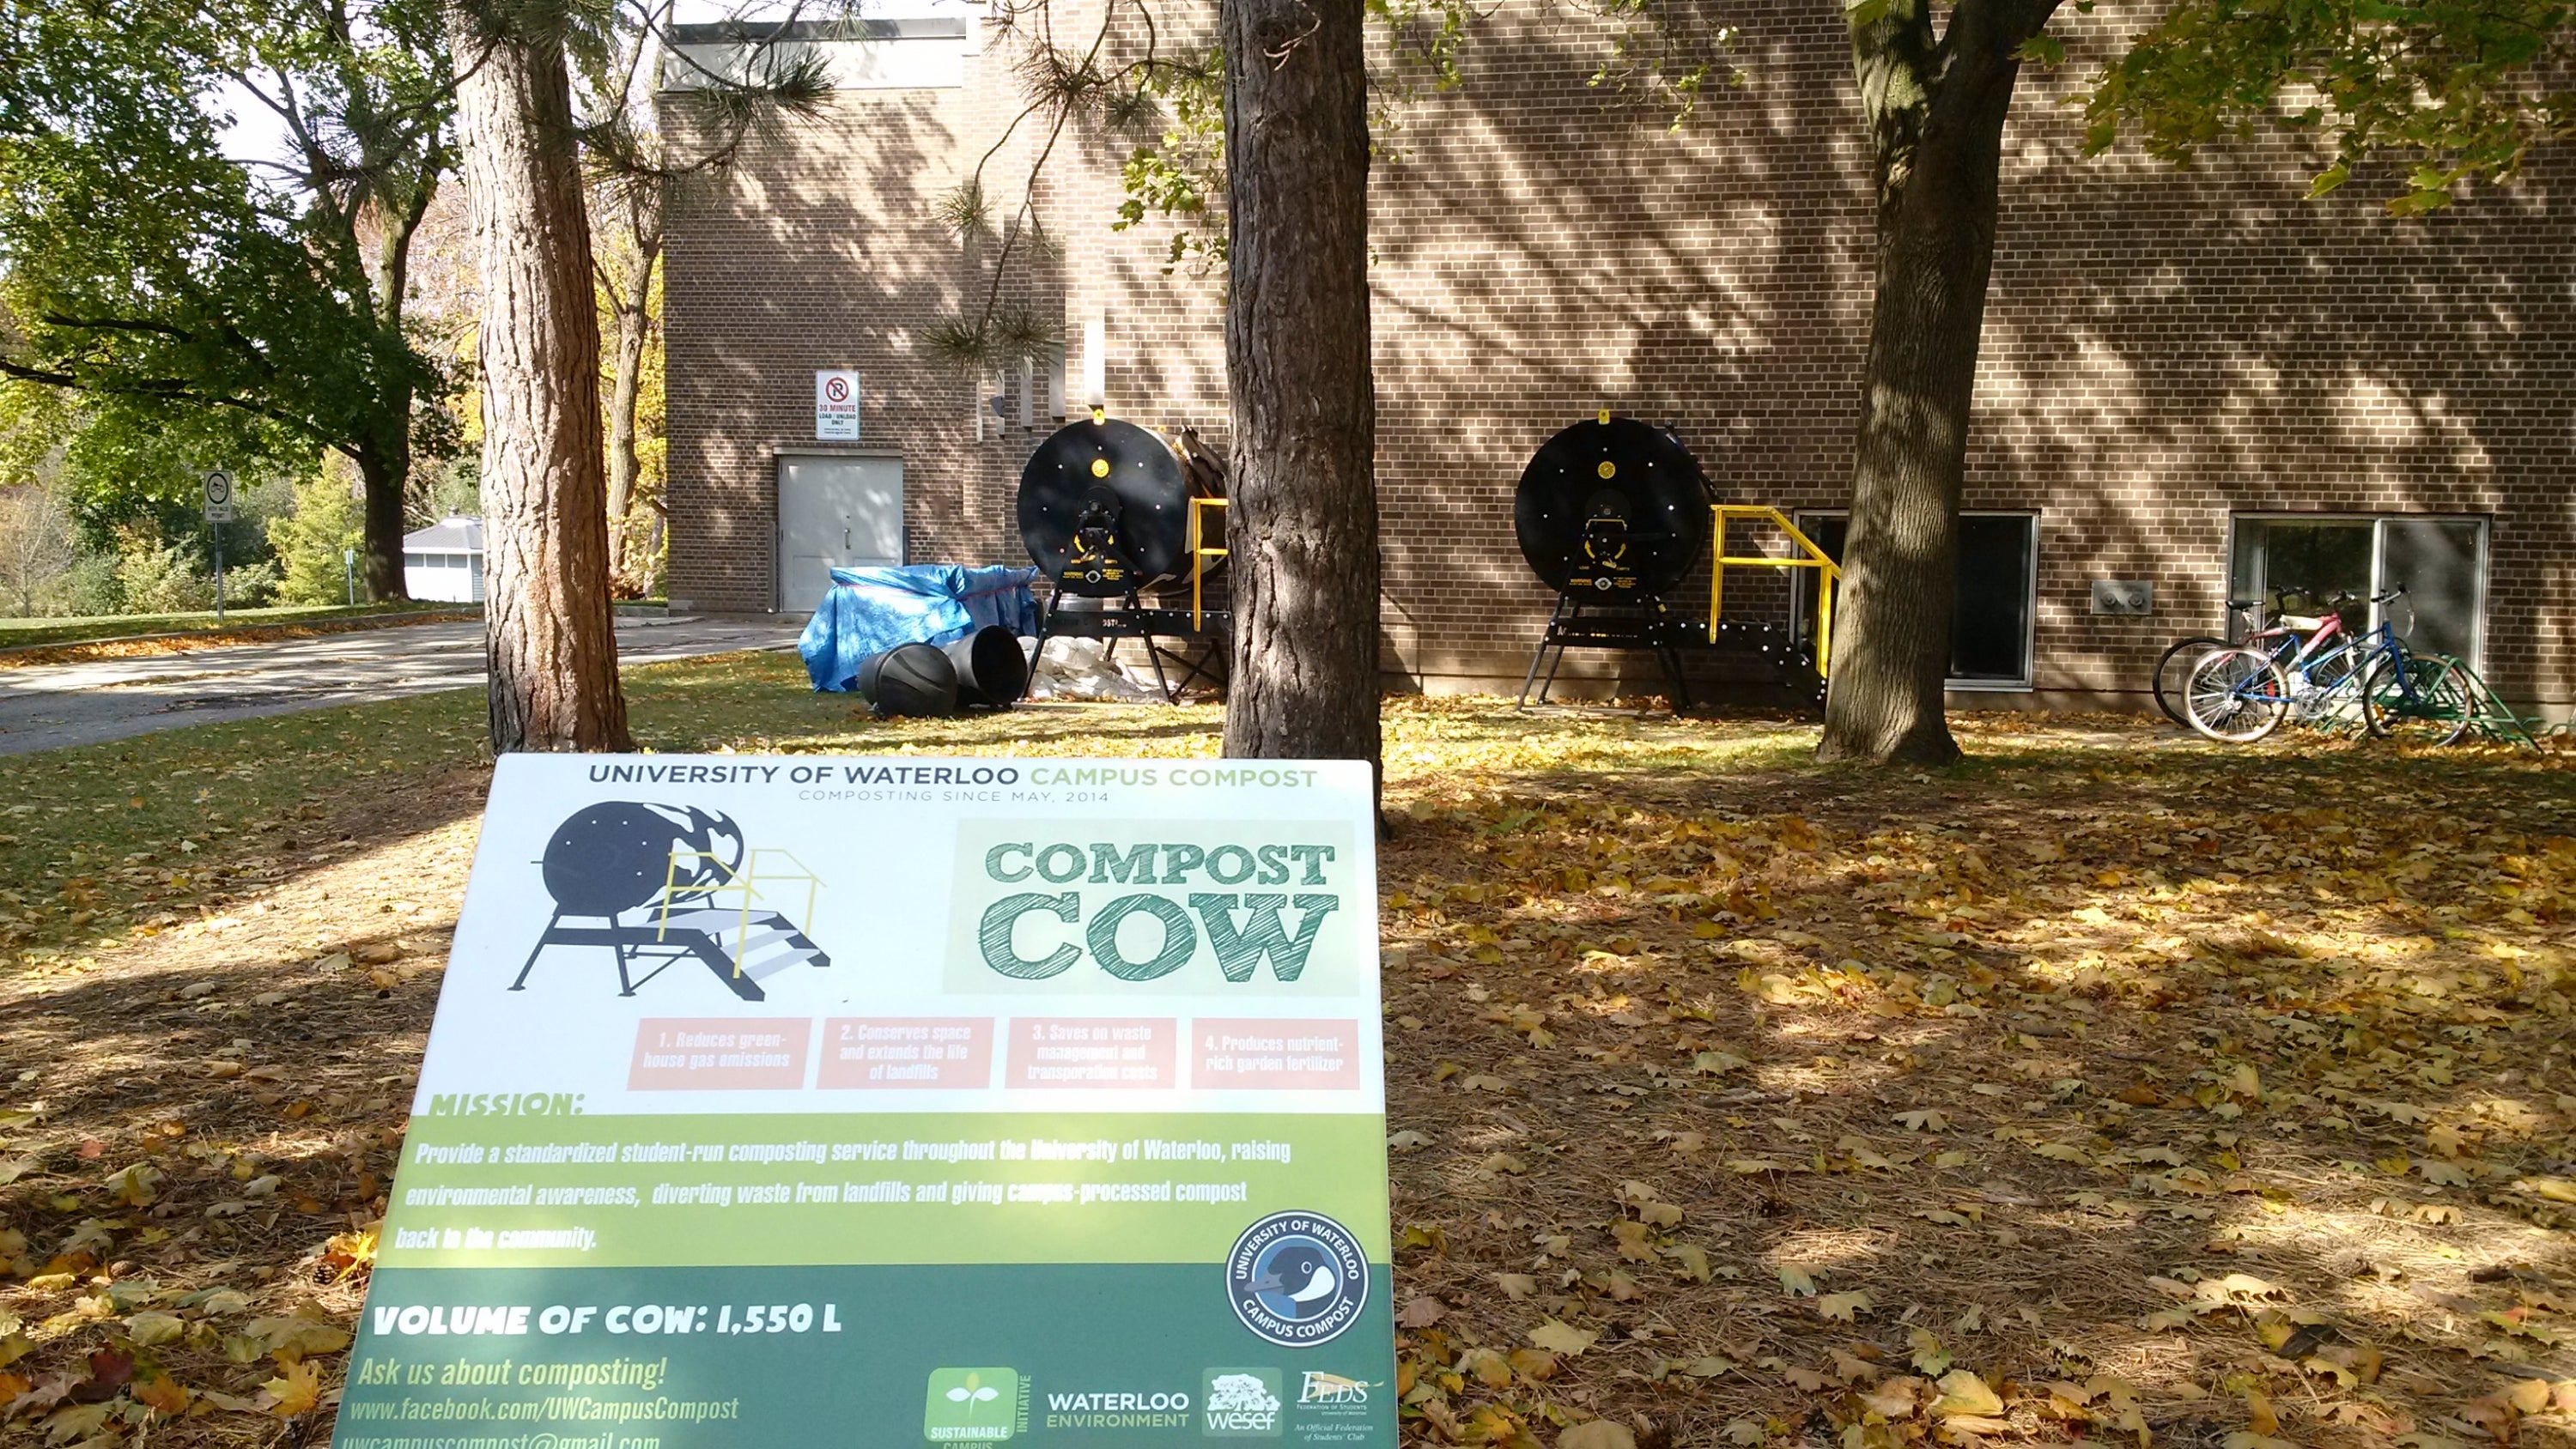 Campus compost sign with compost cows in background